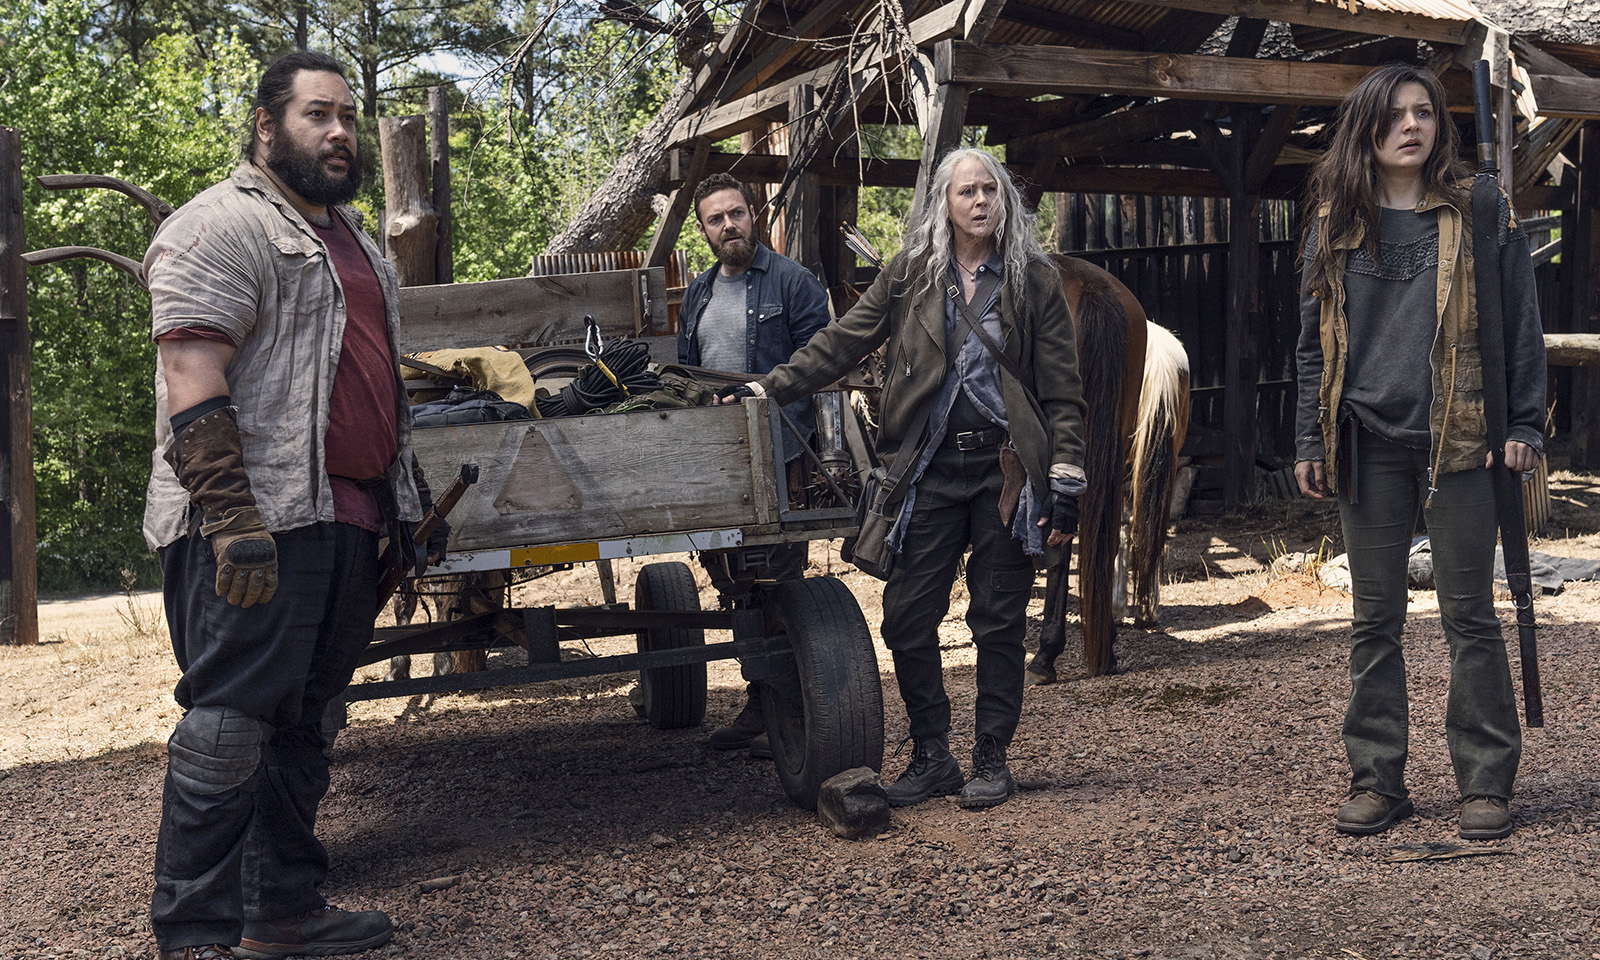 CRÍTICA | The Walking Dead S11E05 – “Out of the Ashes”: Ciclo sem fim